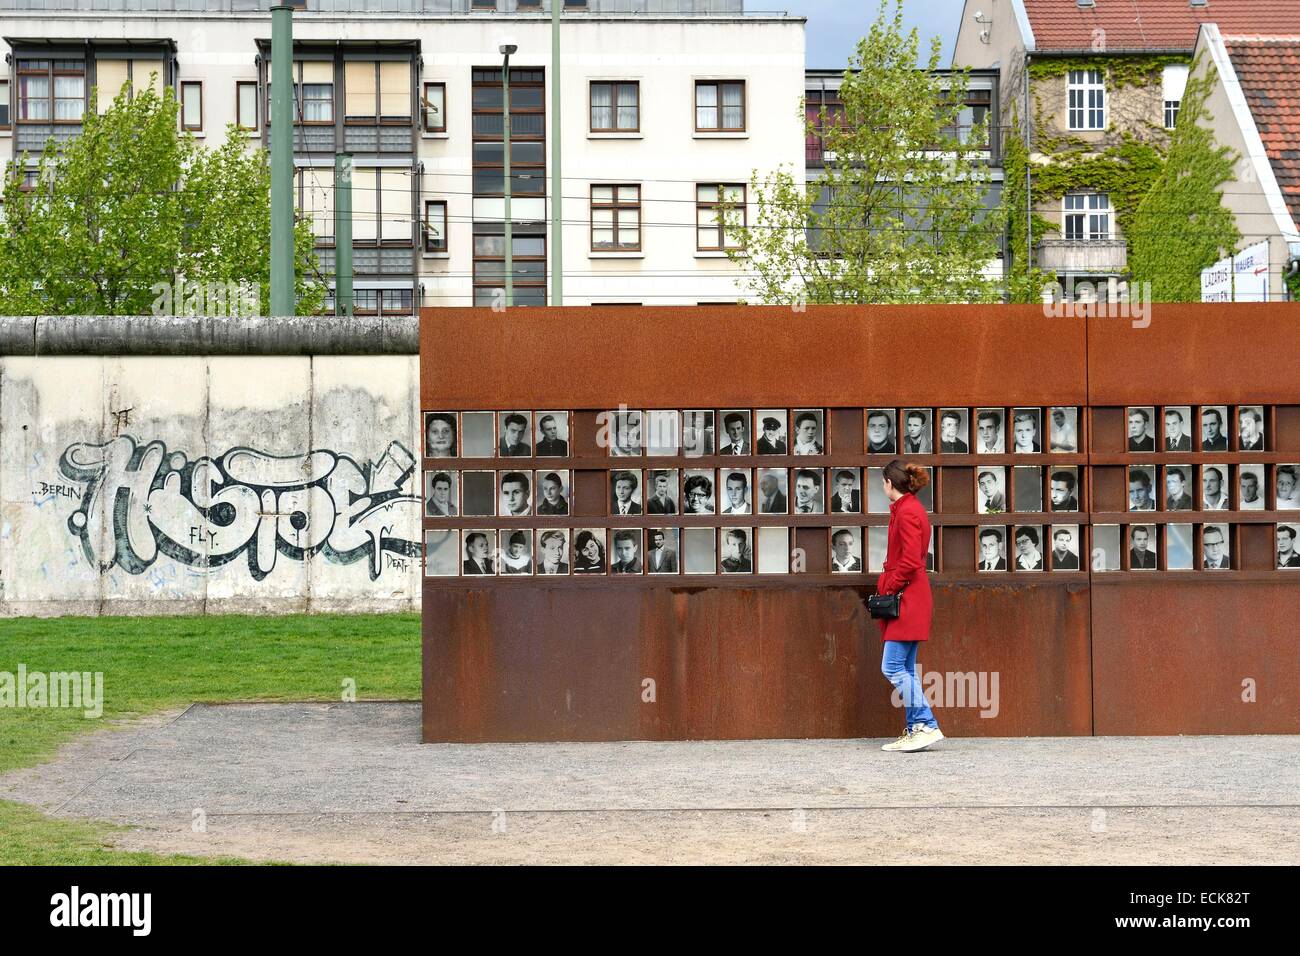 Germany, Berlin, Bernauer Strasse, Memorial of the Berlin Wall (GedenkstΣtte Berliner Mauer), das Fenster des Gedenkens (Window of Remembrance) where the victims of the Wall are honored with their name and a photo-portrait Stock Photo